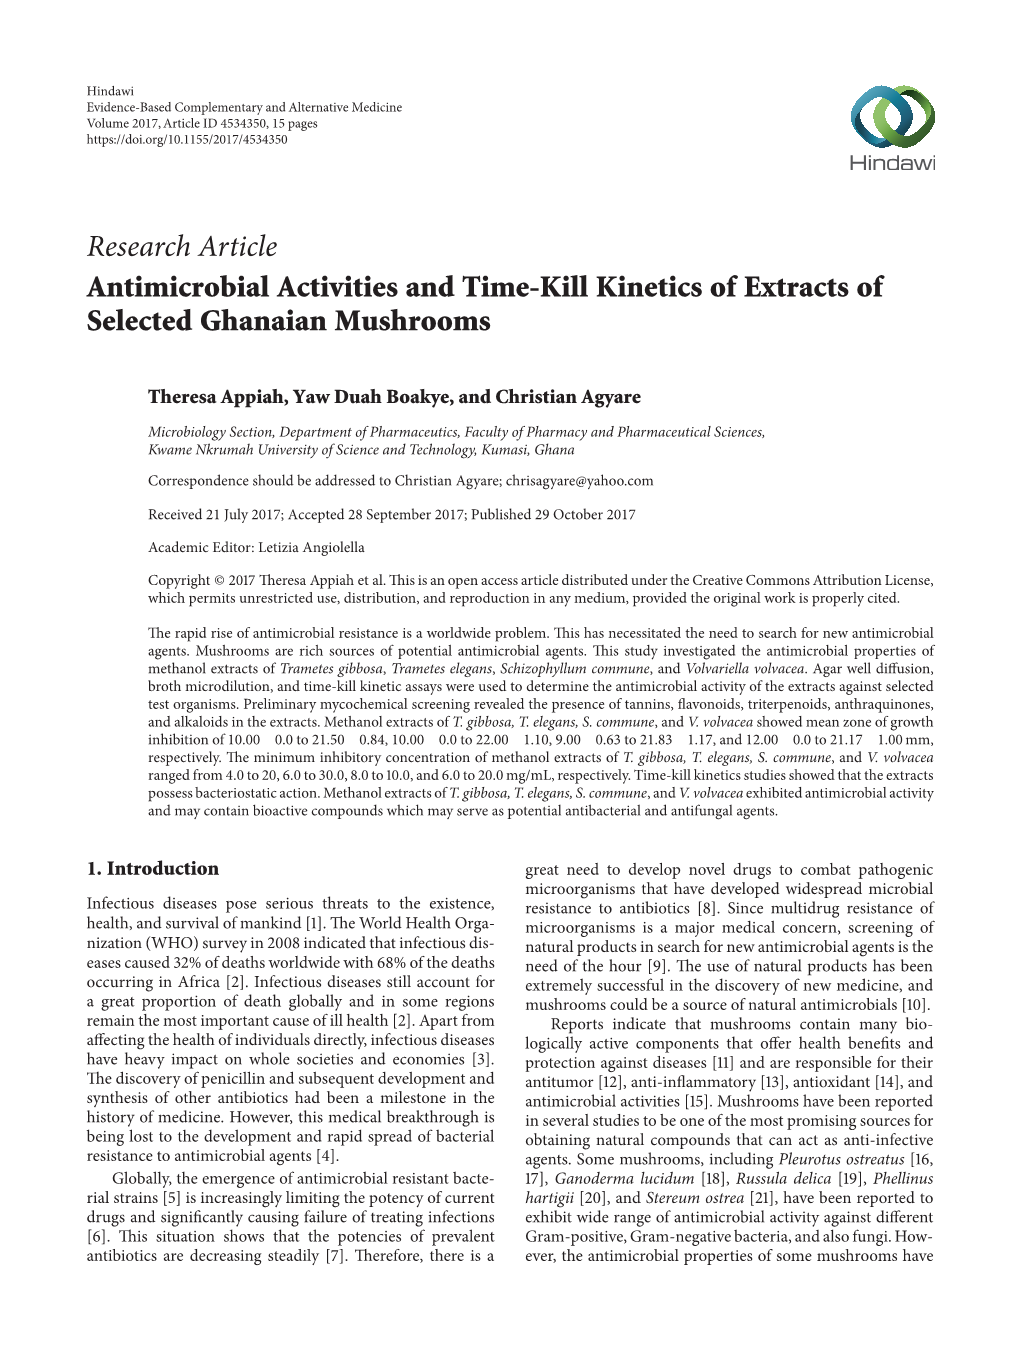 Research Article Antimicrobial Activities and Time-Kill Kinetics of Extracts of Selected Ghanaian Mushrooms